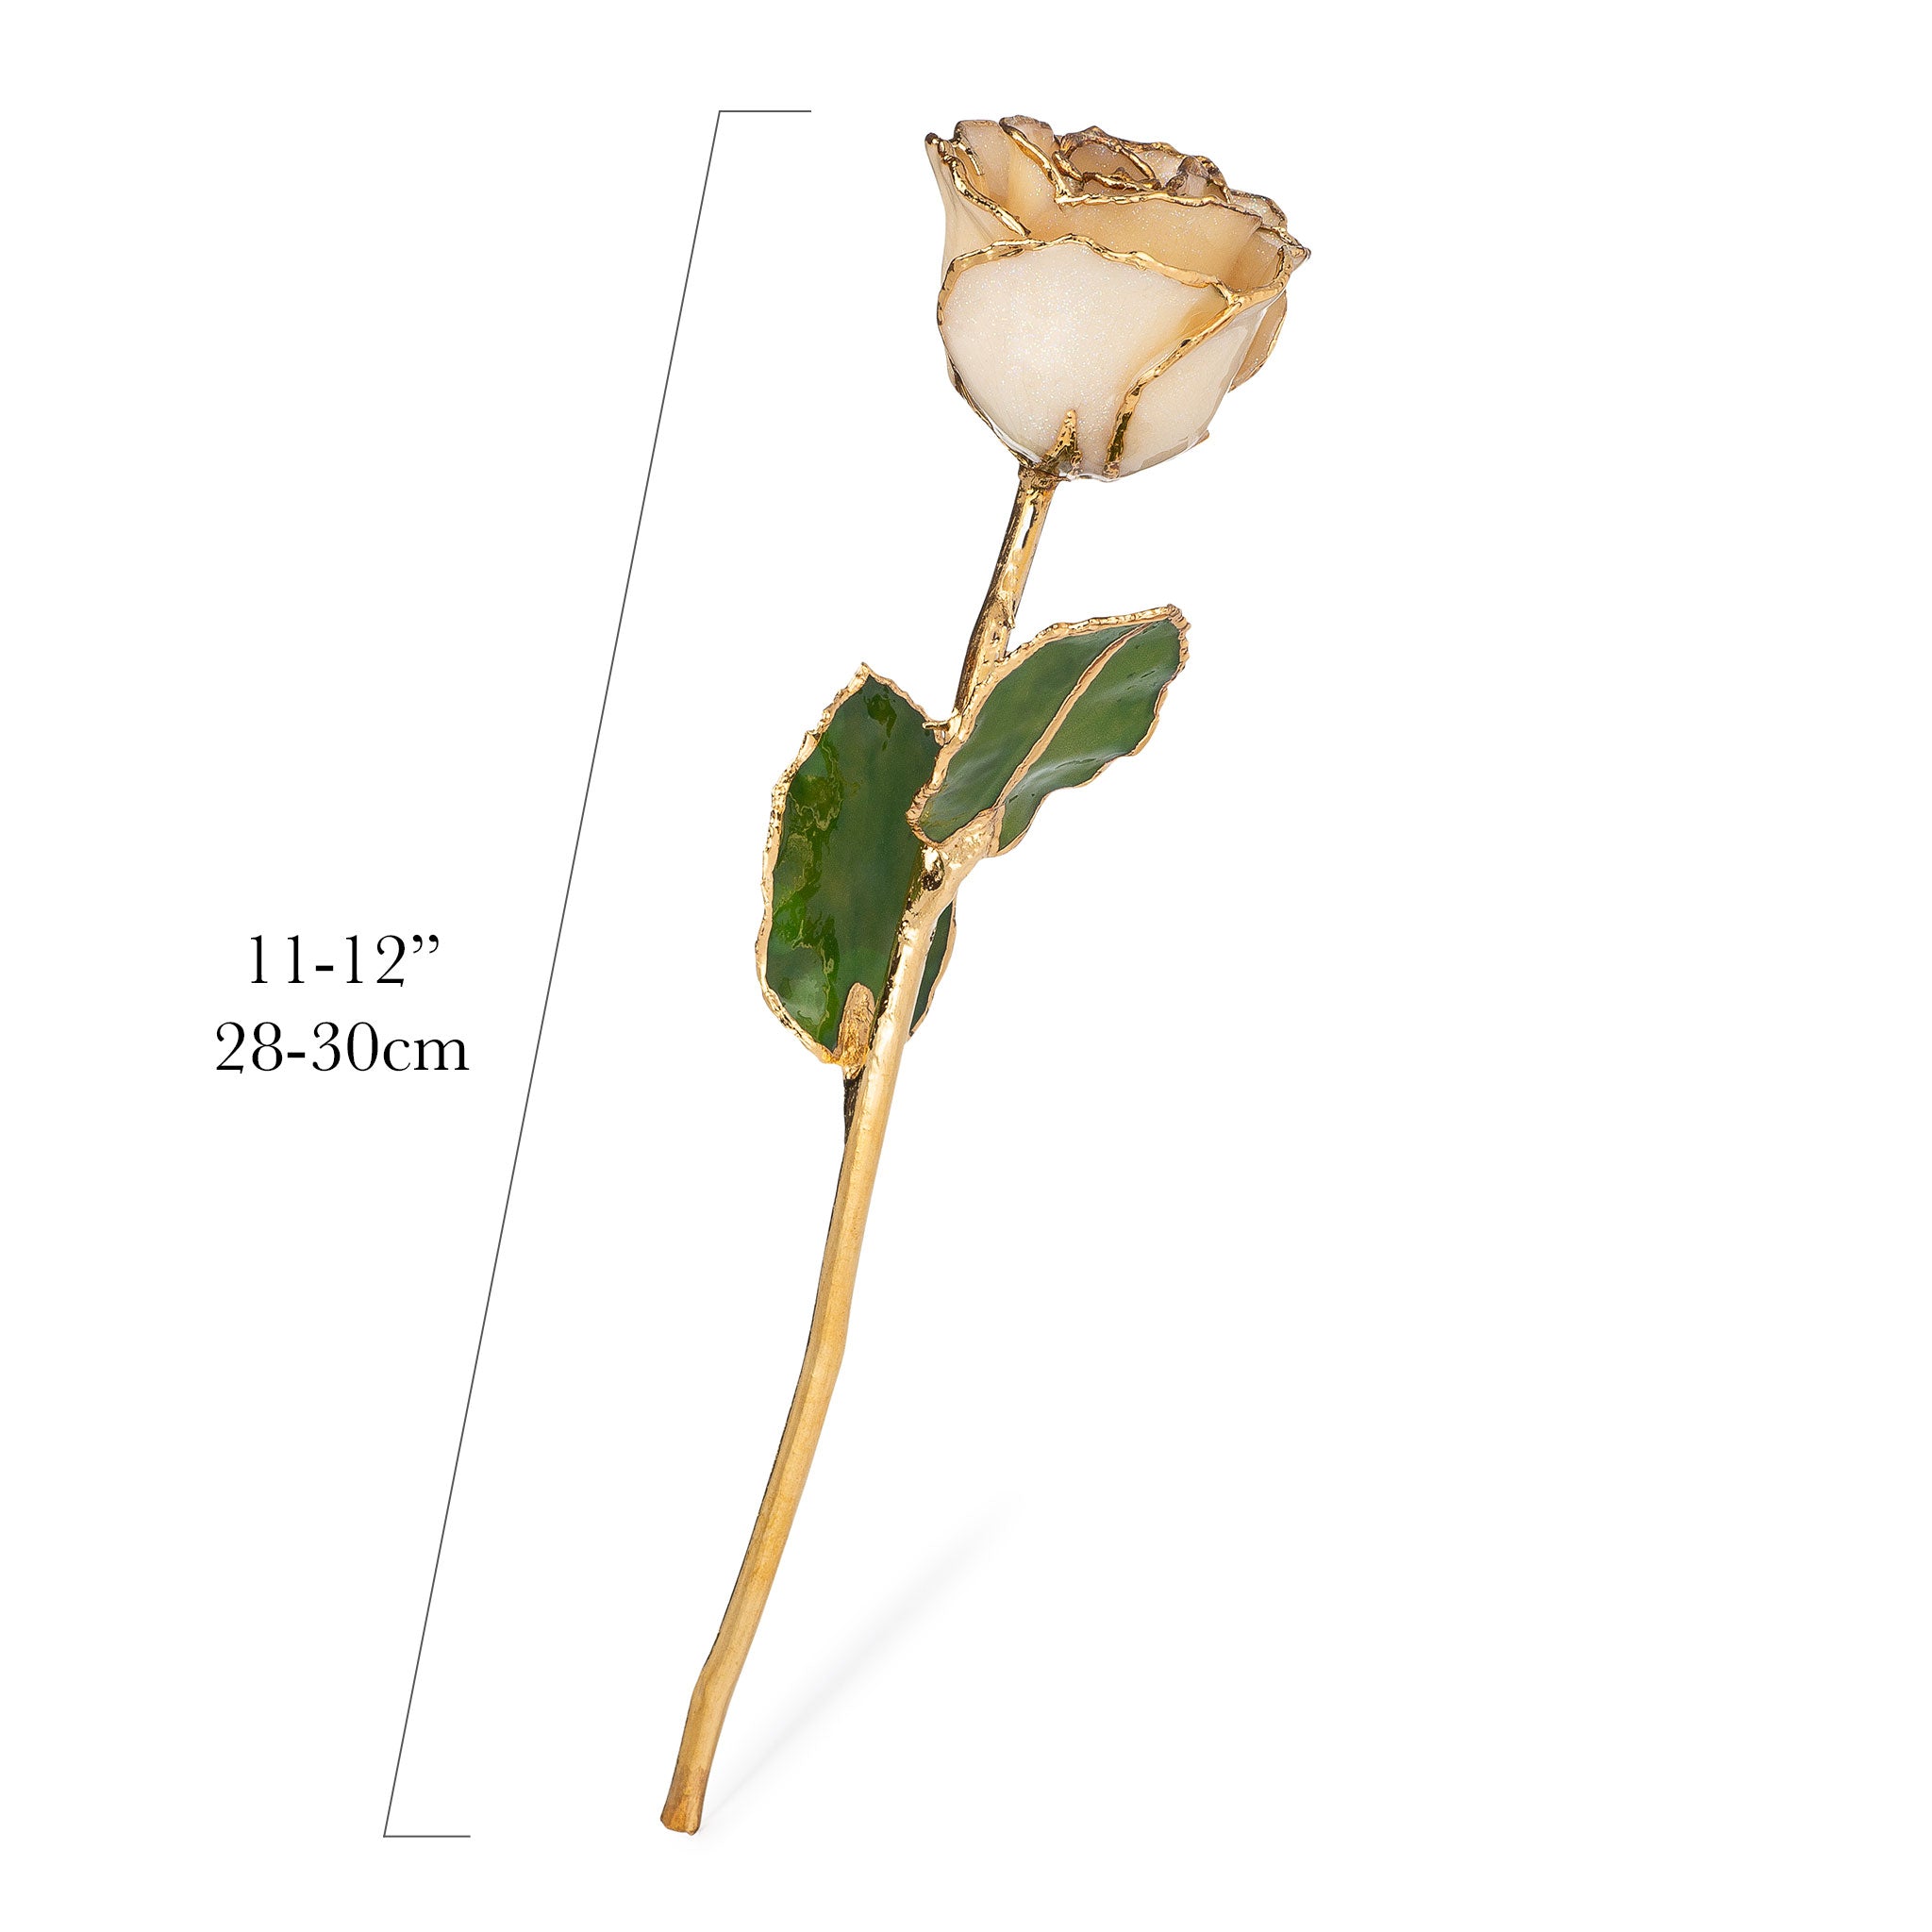 24K Gold Trimmed Forever Rose with Diamond Petals with Sparkles. View of Stem, Leaves, and Rose Petals and Showing Detail of Gold Trim showing measurements